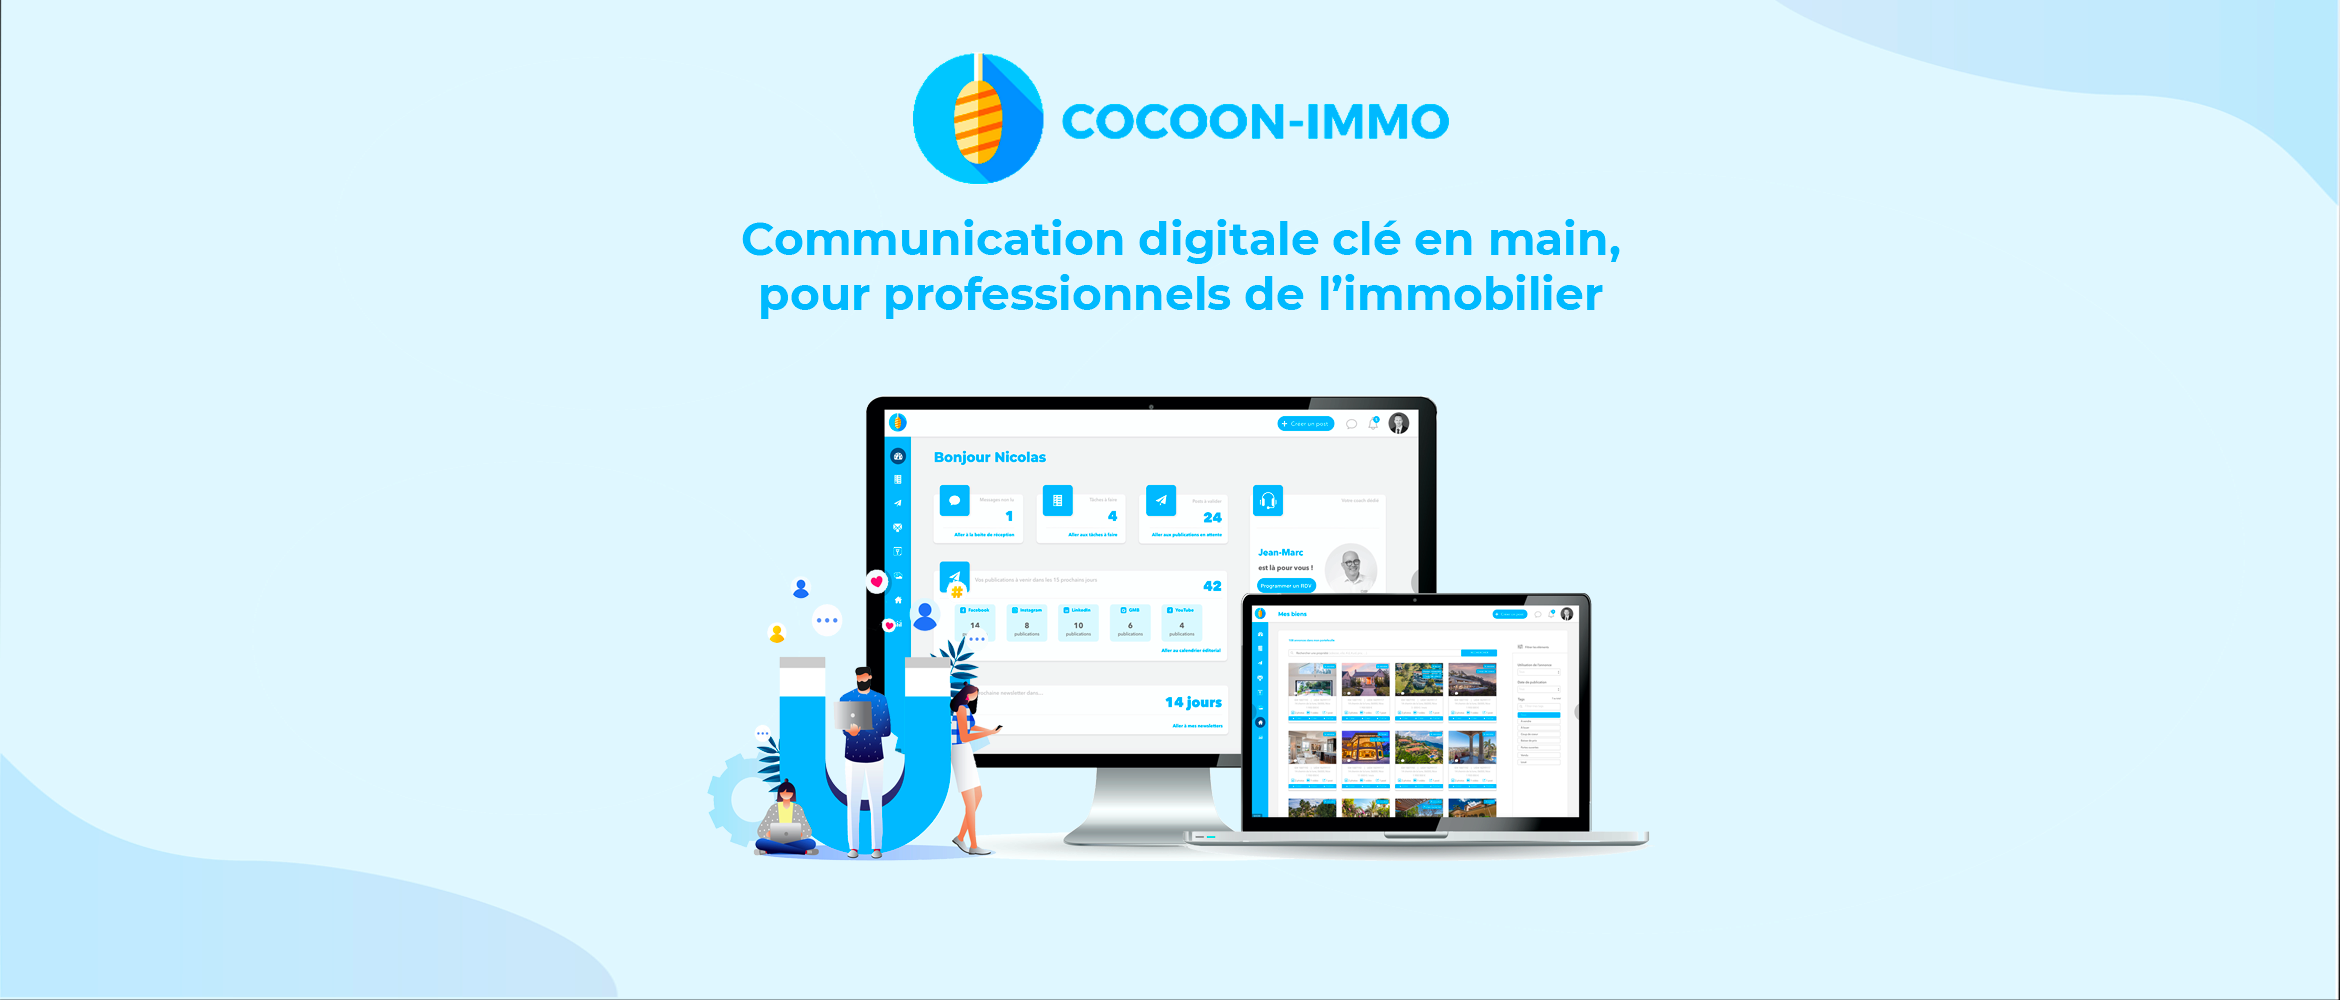 cocoon immo